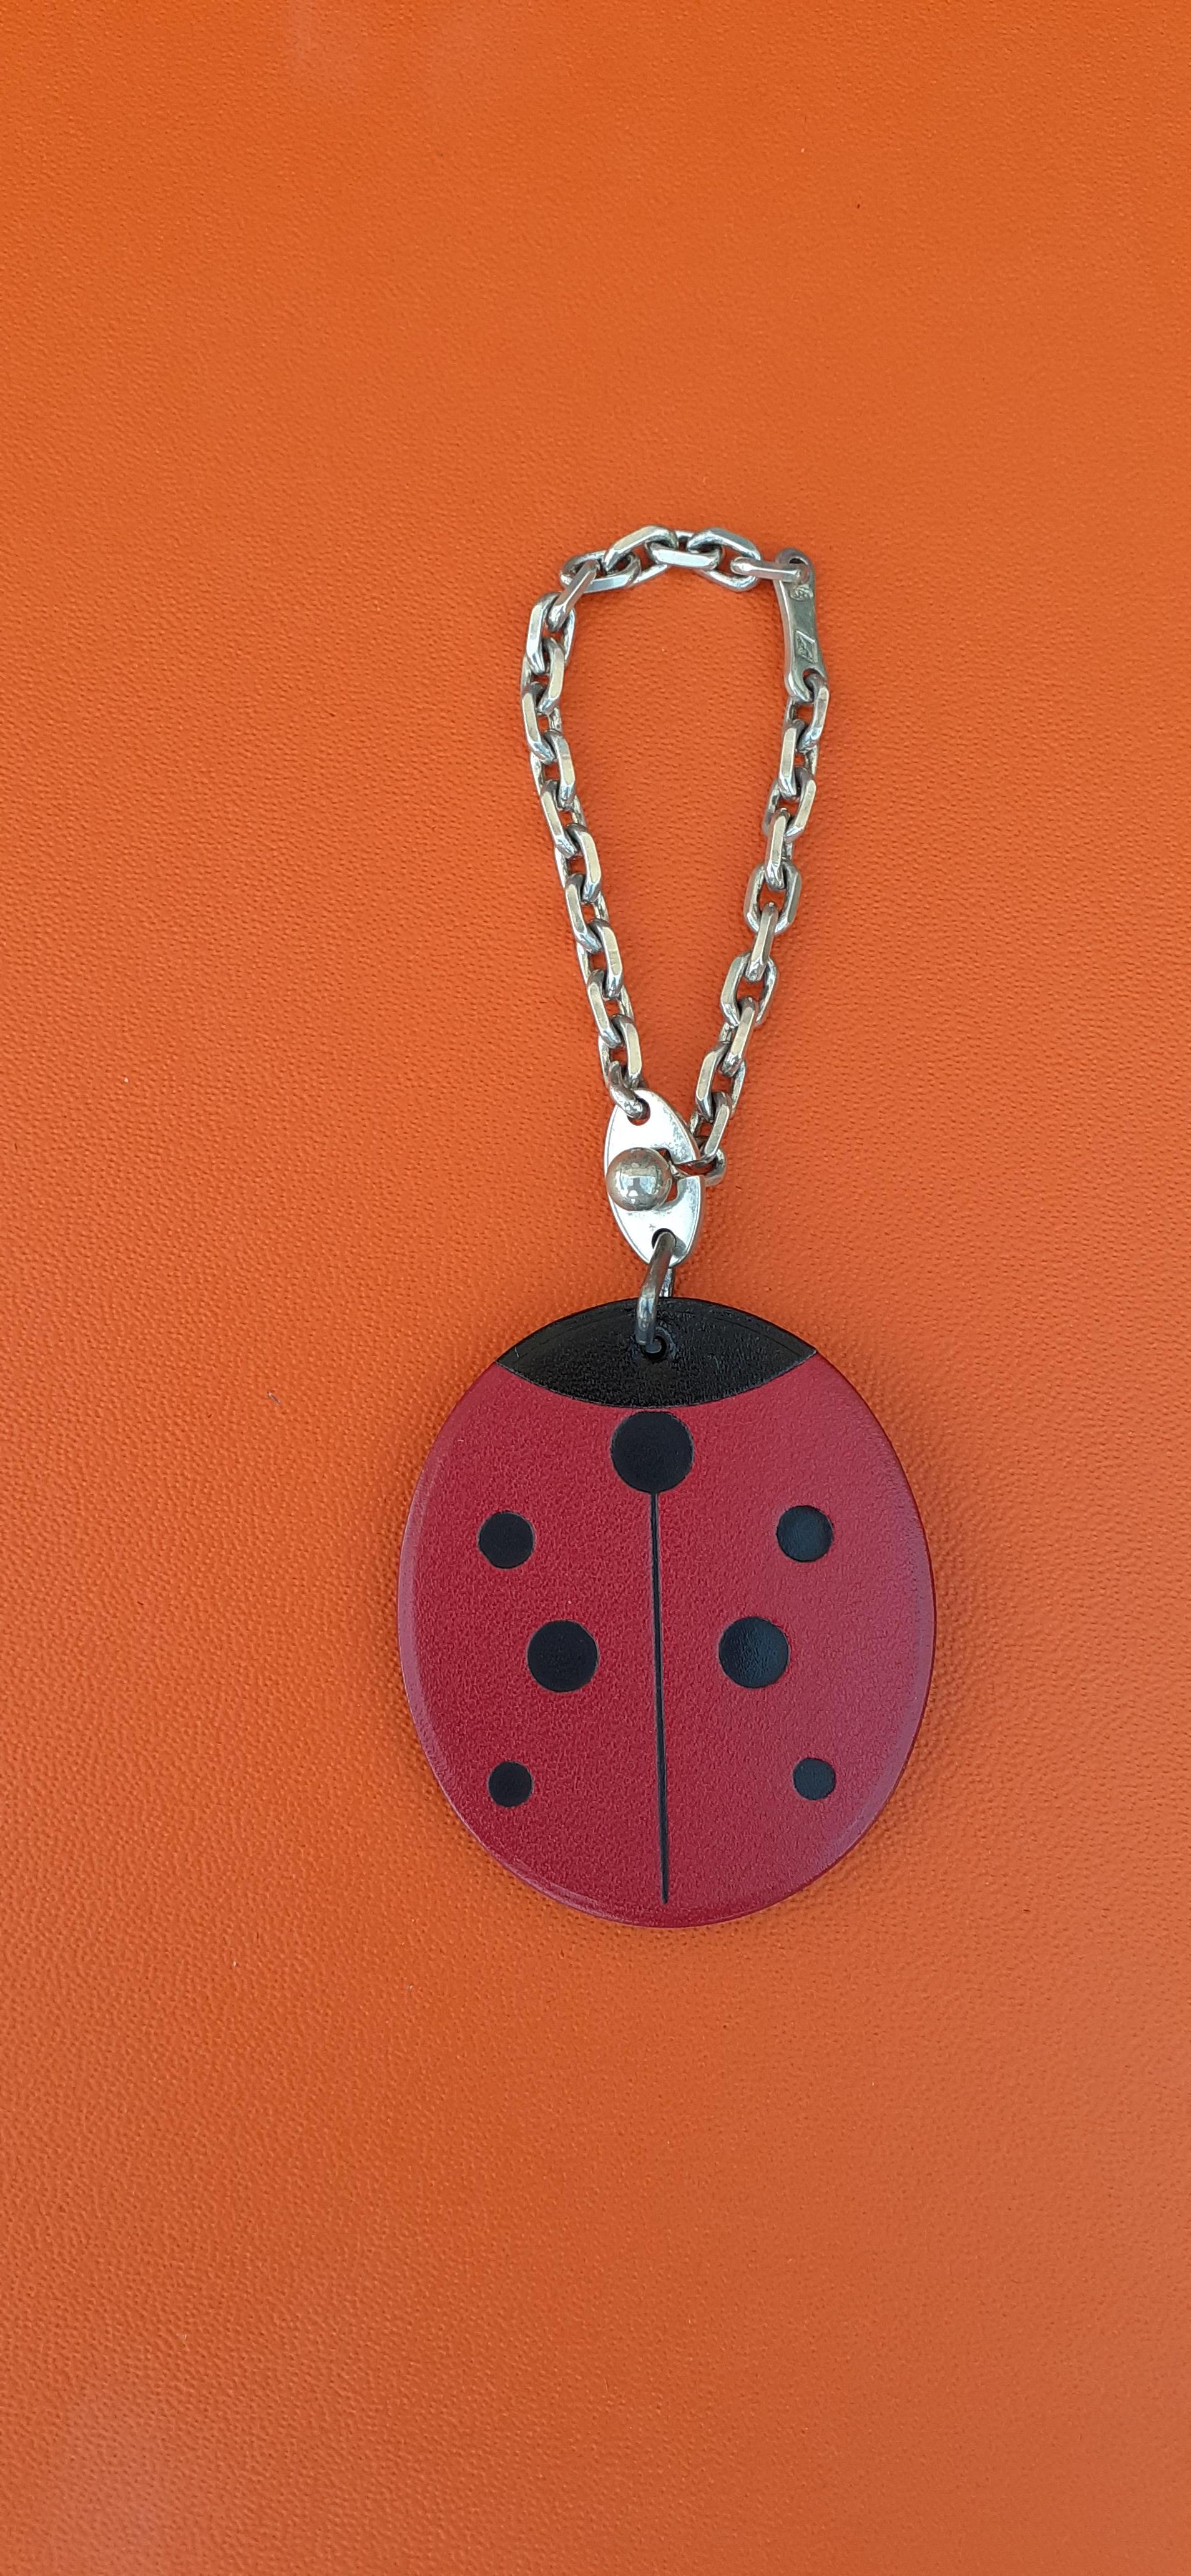 Super Cute Authentic Hermès Key Holder

Can be used as Bag Charm for your Kelly, Birkin or other Hermès Bag

Made in France

In shape of a Ladybug

Made of Smooth Leather and Sterling Silver

Colorways: Red, Black, Silver

